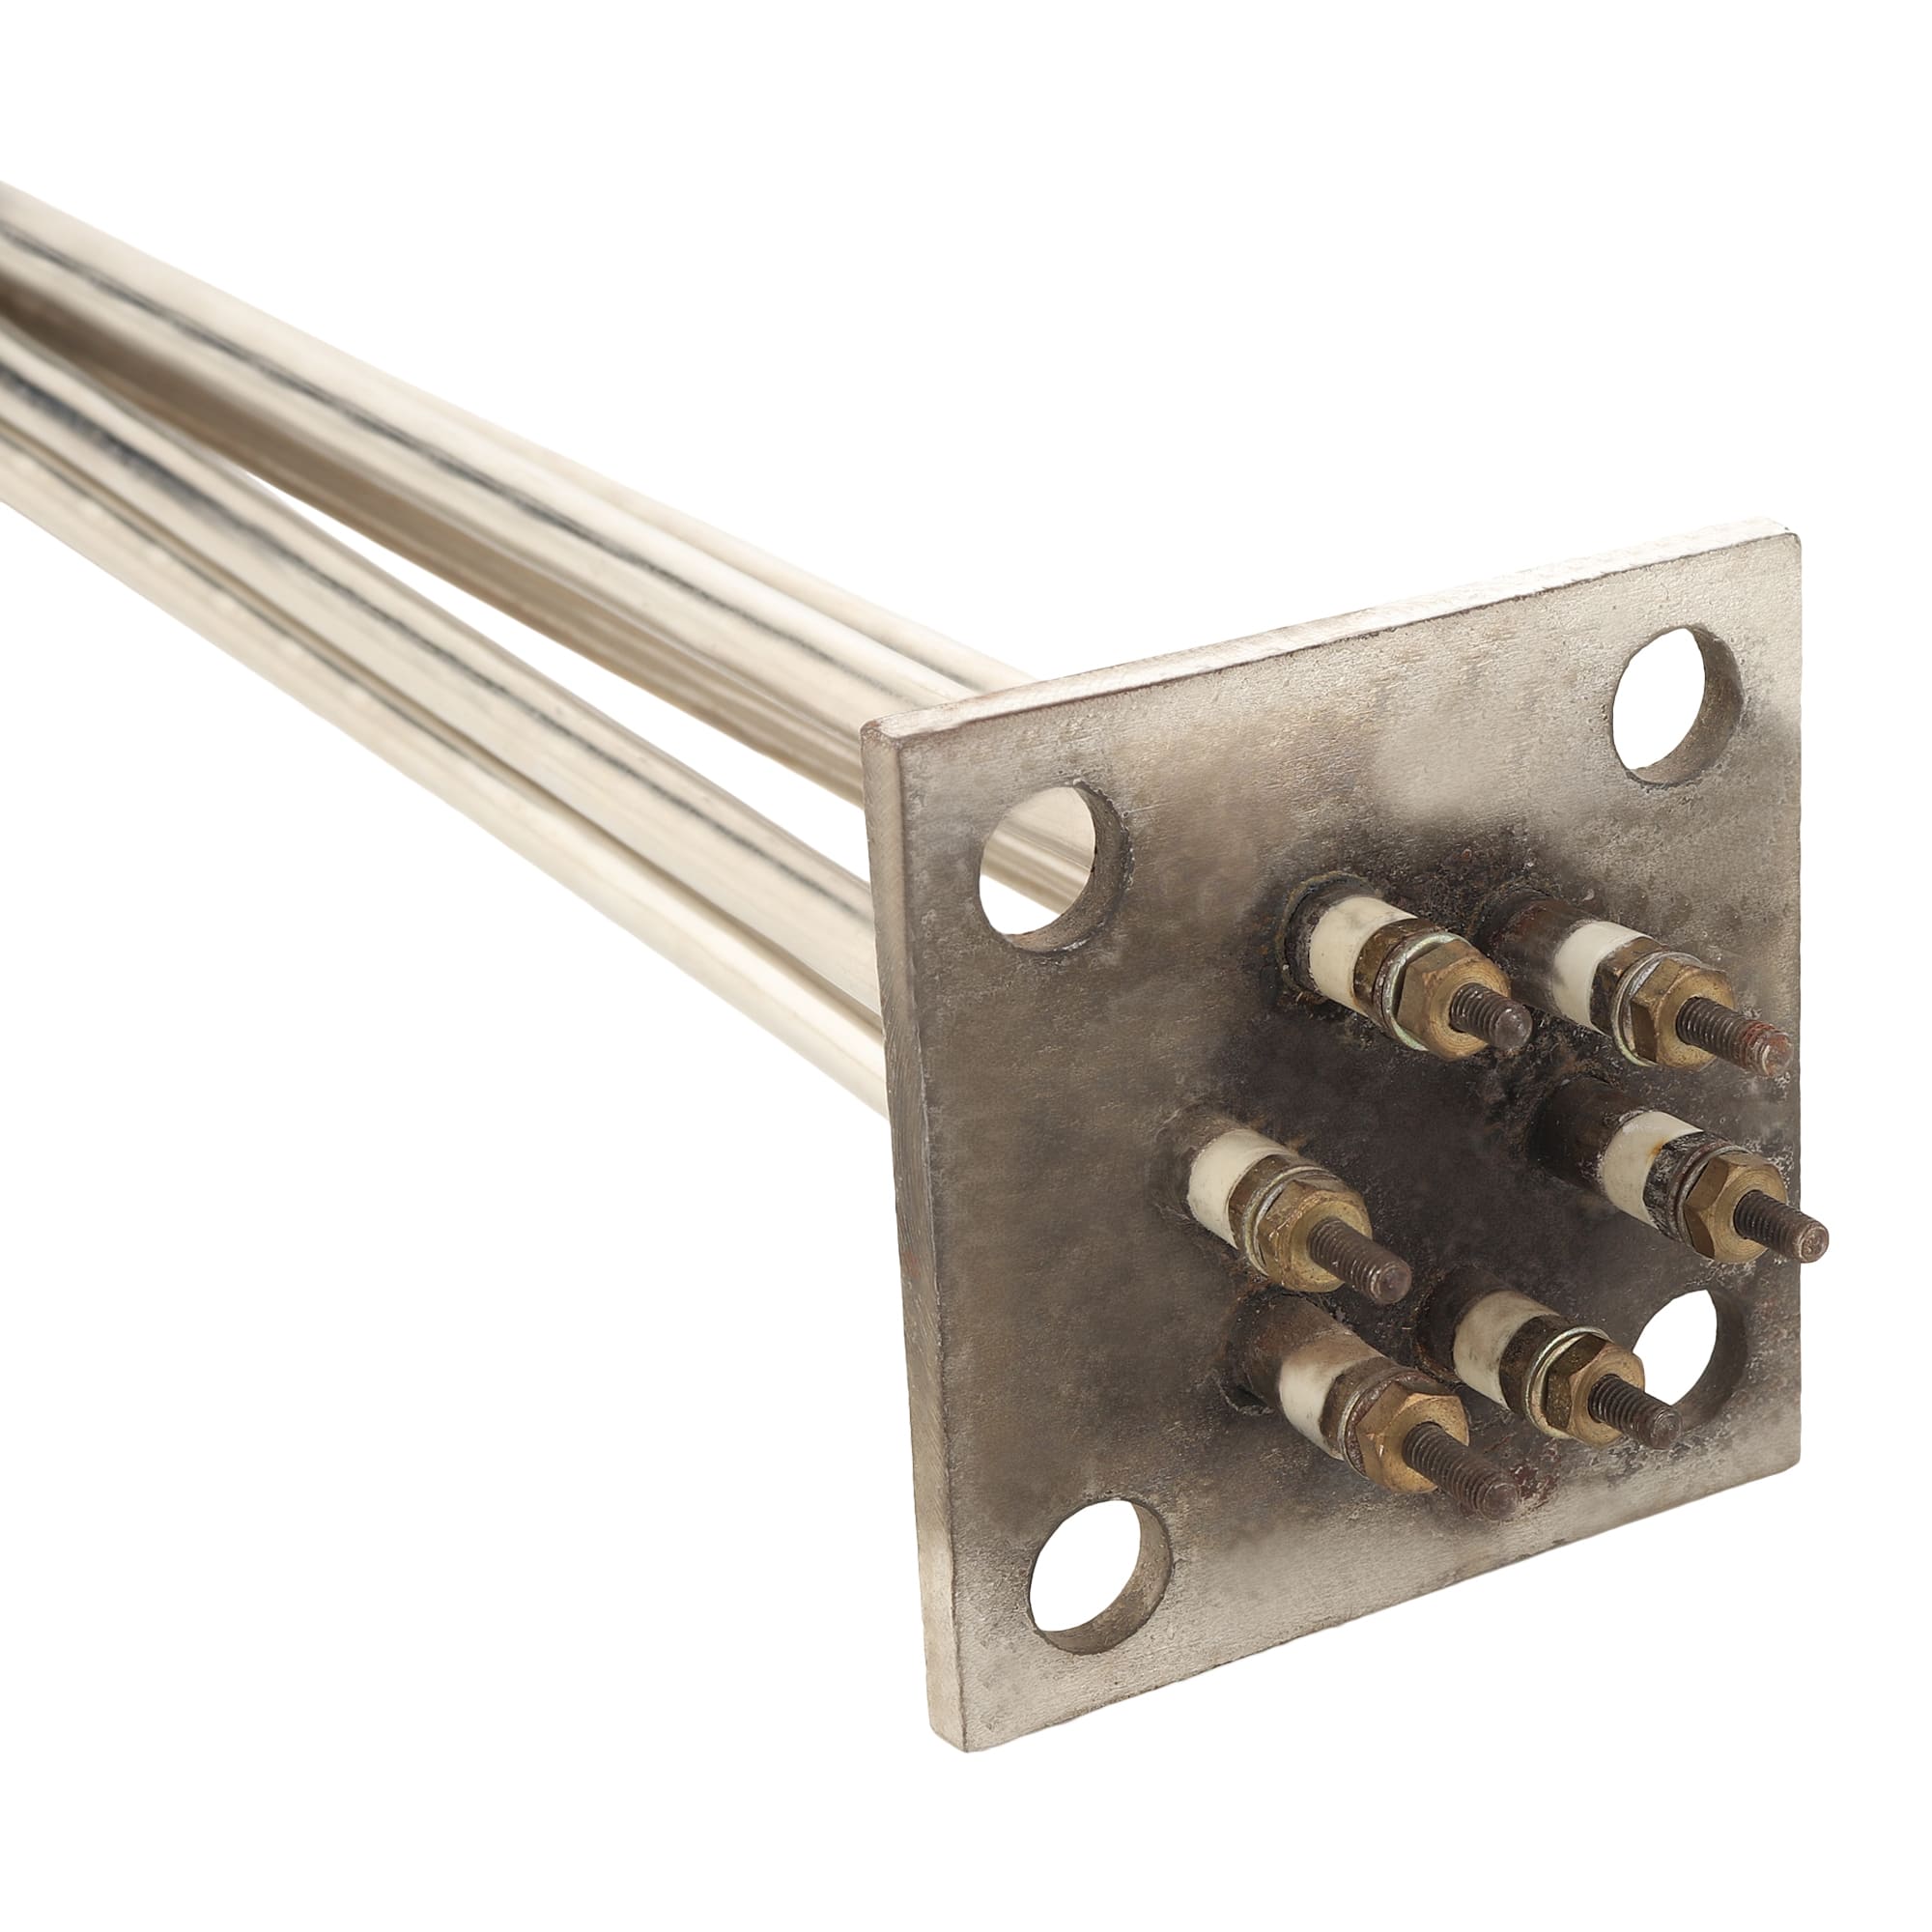 Flange Type Immersion Heater